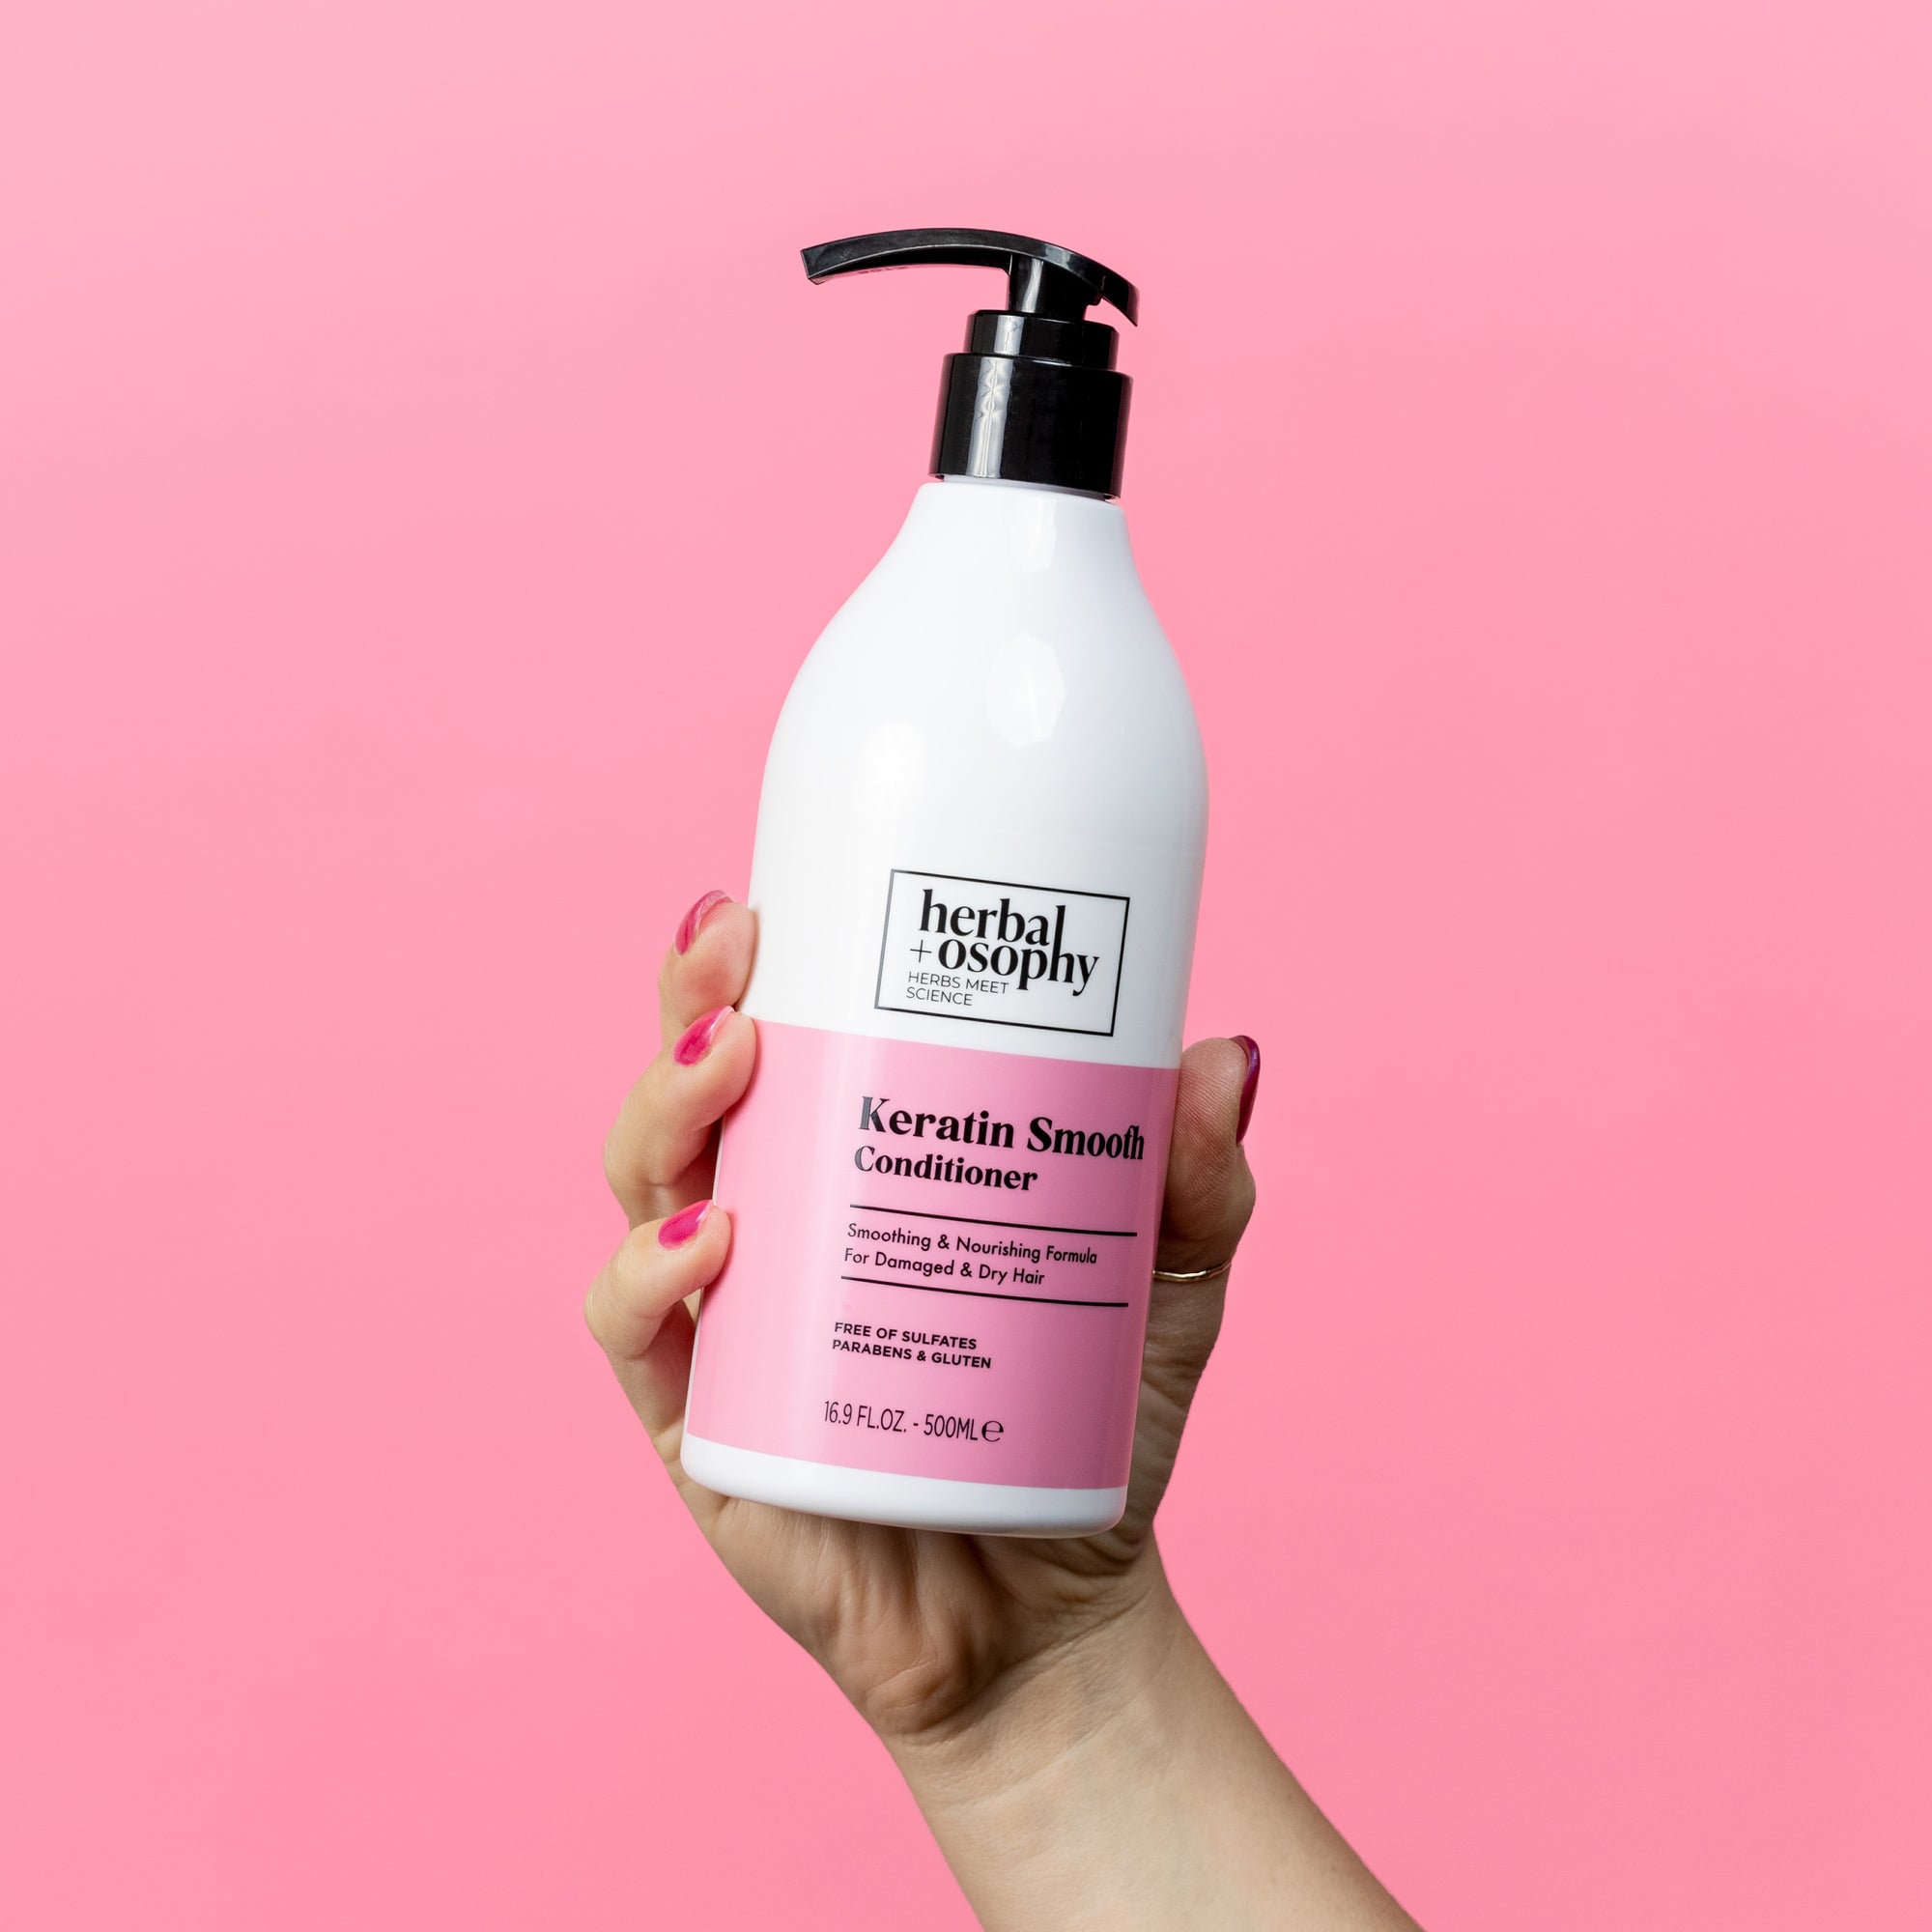 Herbalosophy Keratin Smooth Conditioner bottle held in front of pink backdrop